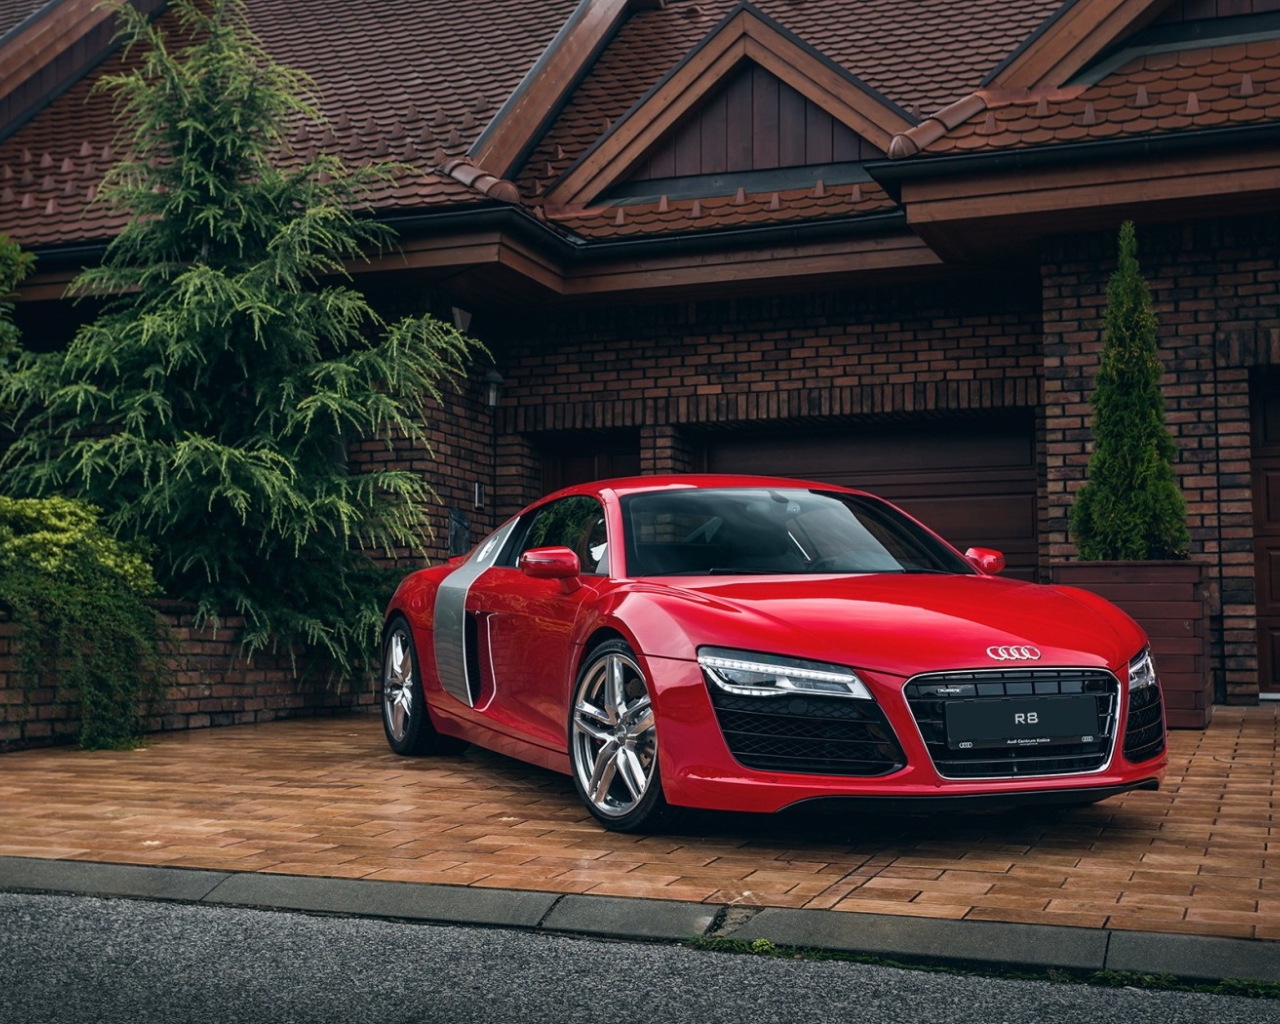 1280x1024 Audi R8 Red 1280x1024 Resolution Wallpaper Hd Cars 4k Wallpapers Images Photos And Background Wallpapers Den